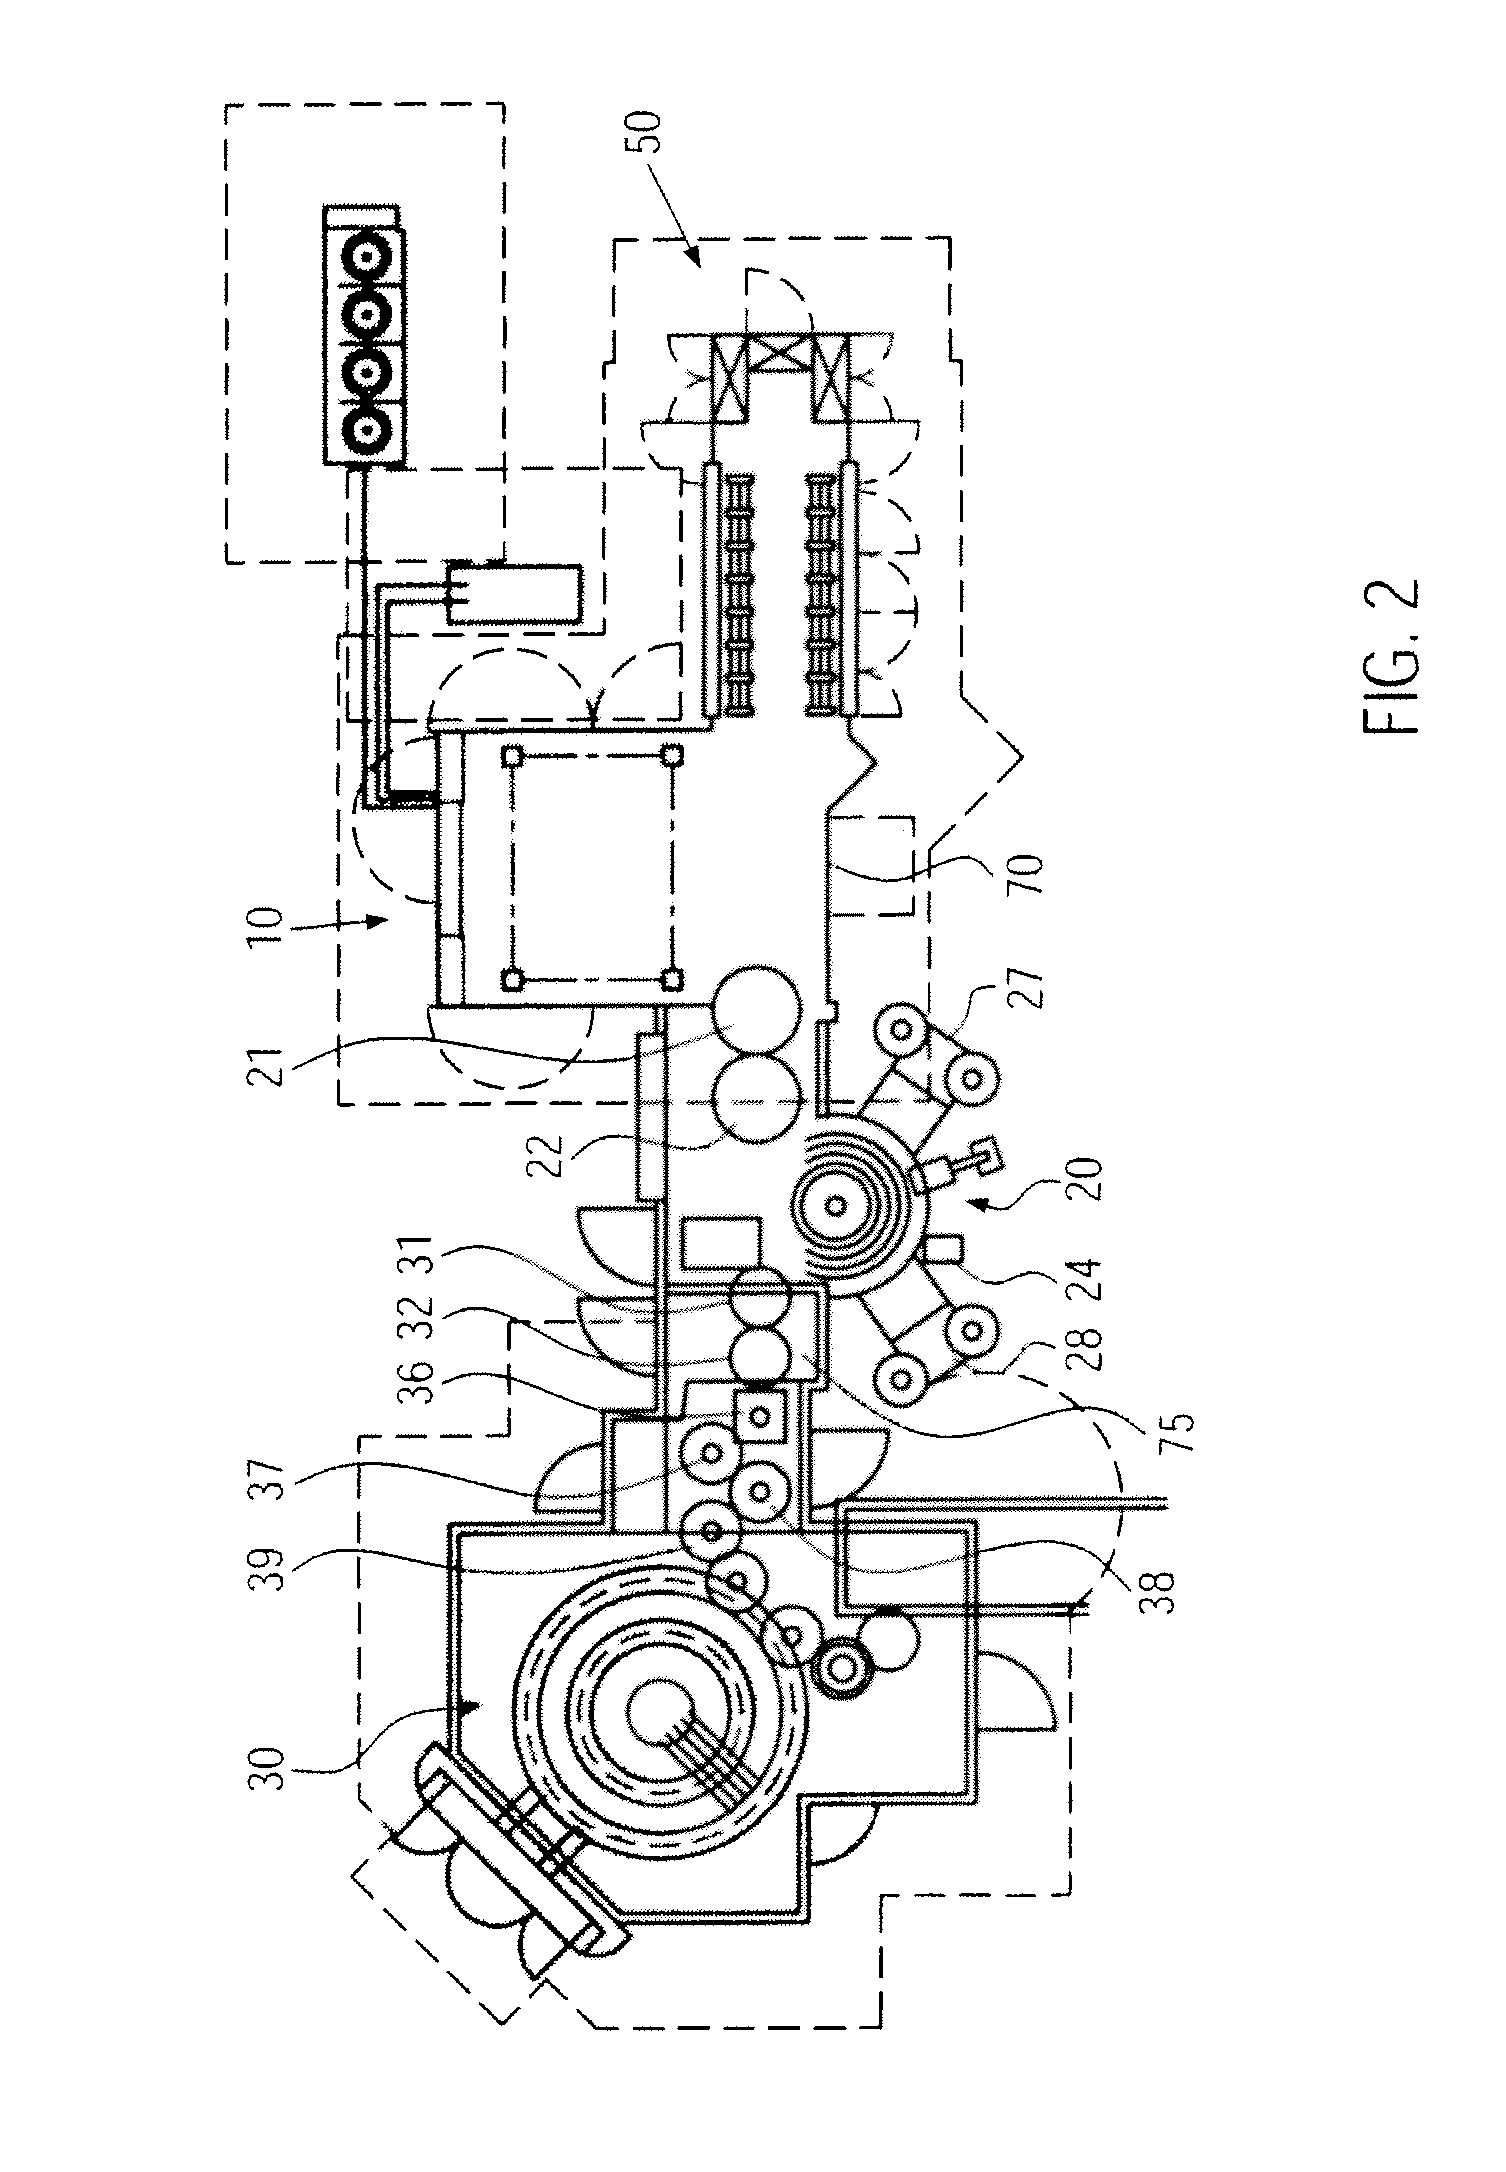 Apparatus and Method for Producing Plastic Bottles